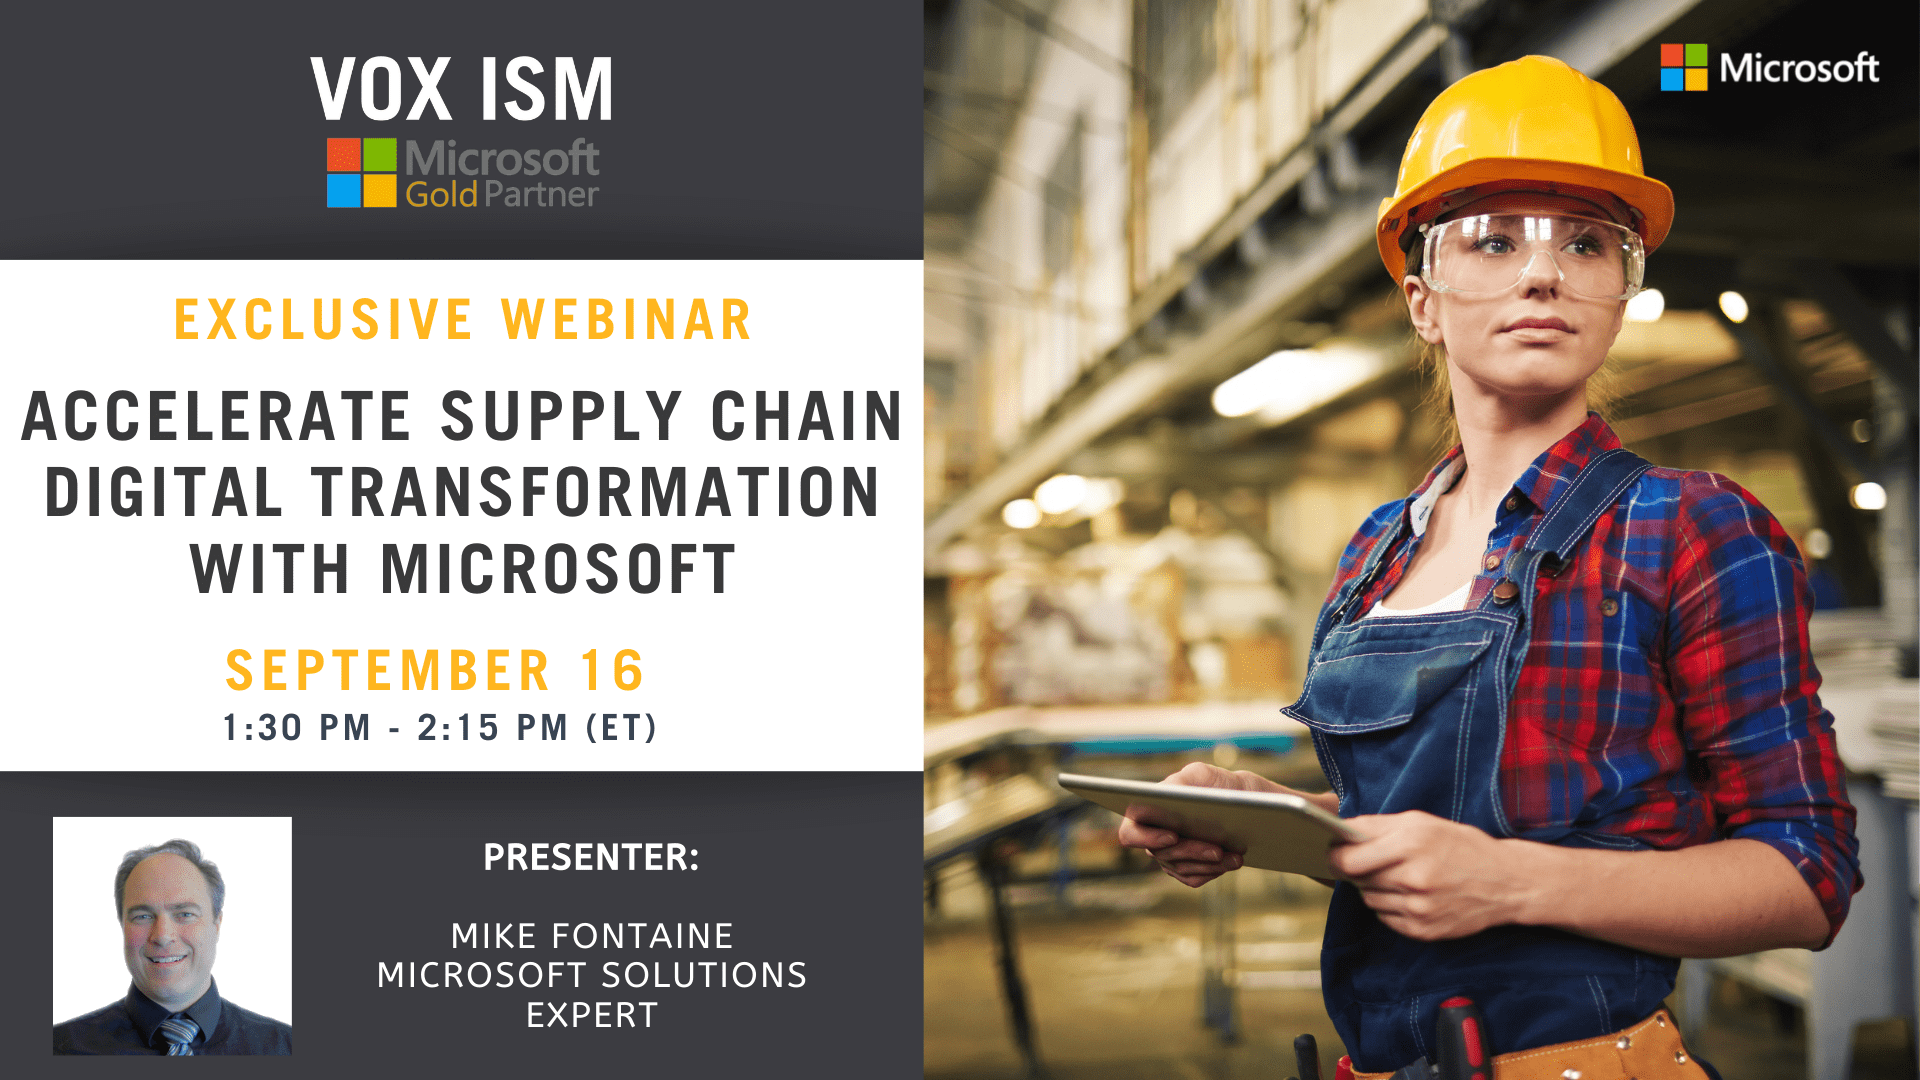 Accelerate Supply Chain Digital Transformation with Microsoft - September 16 - Webinar